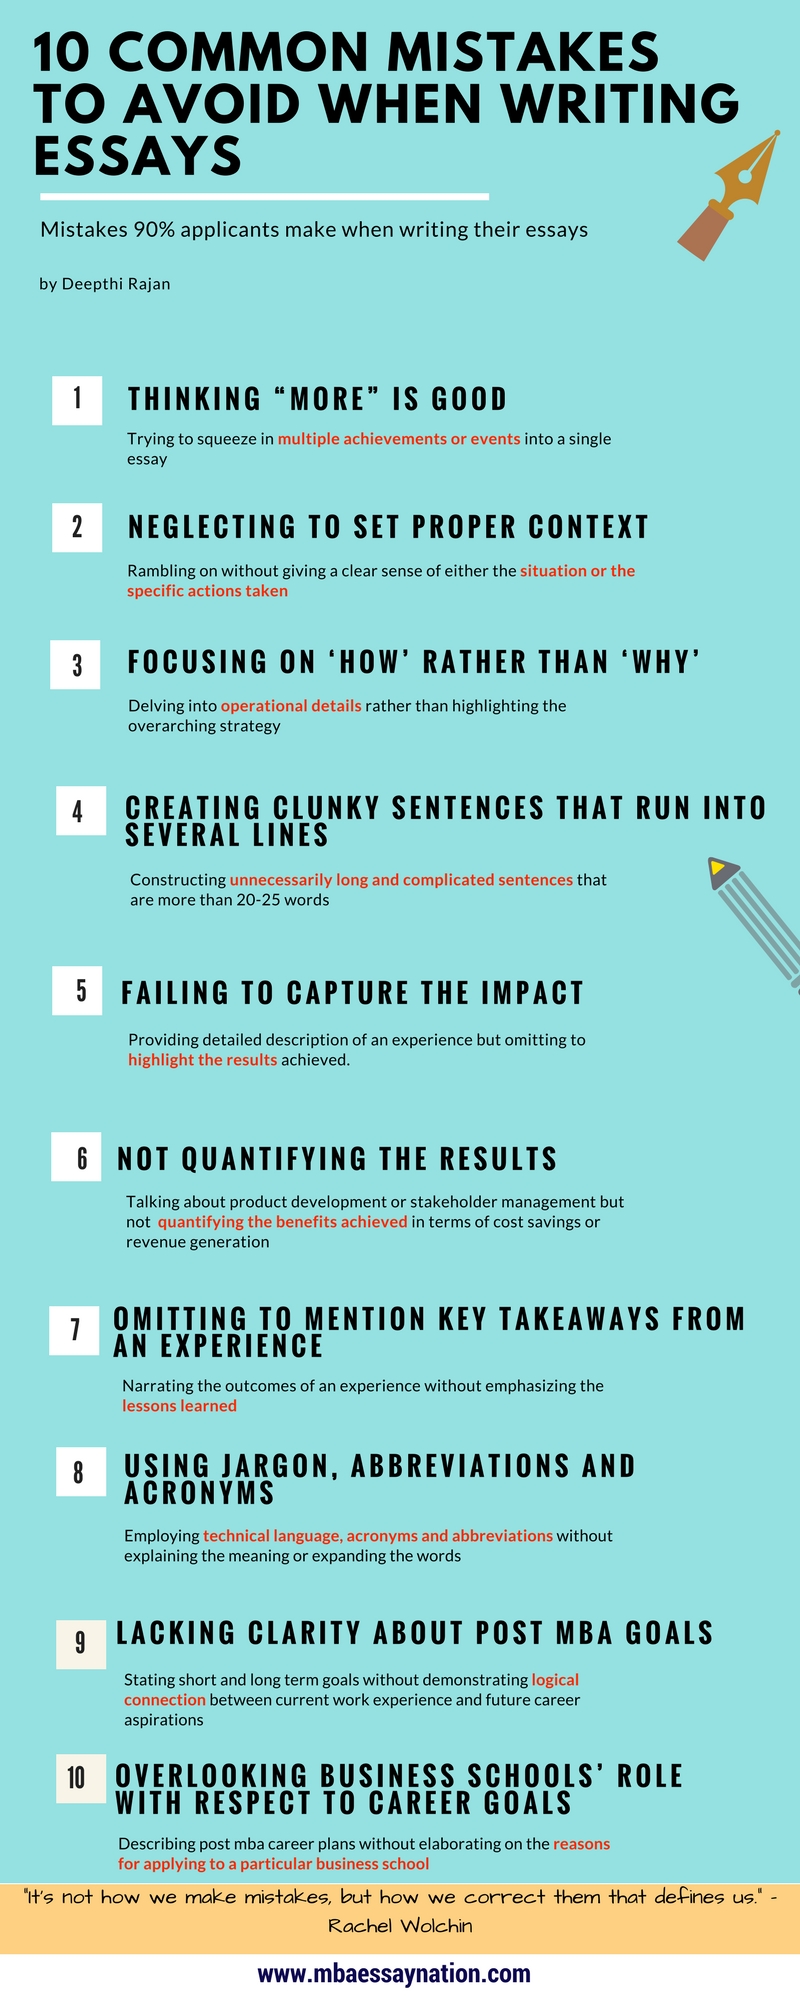 How to Avoid Common Mistakes in Essay Writing